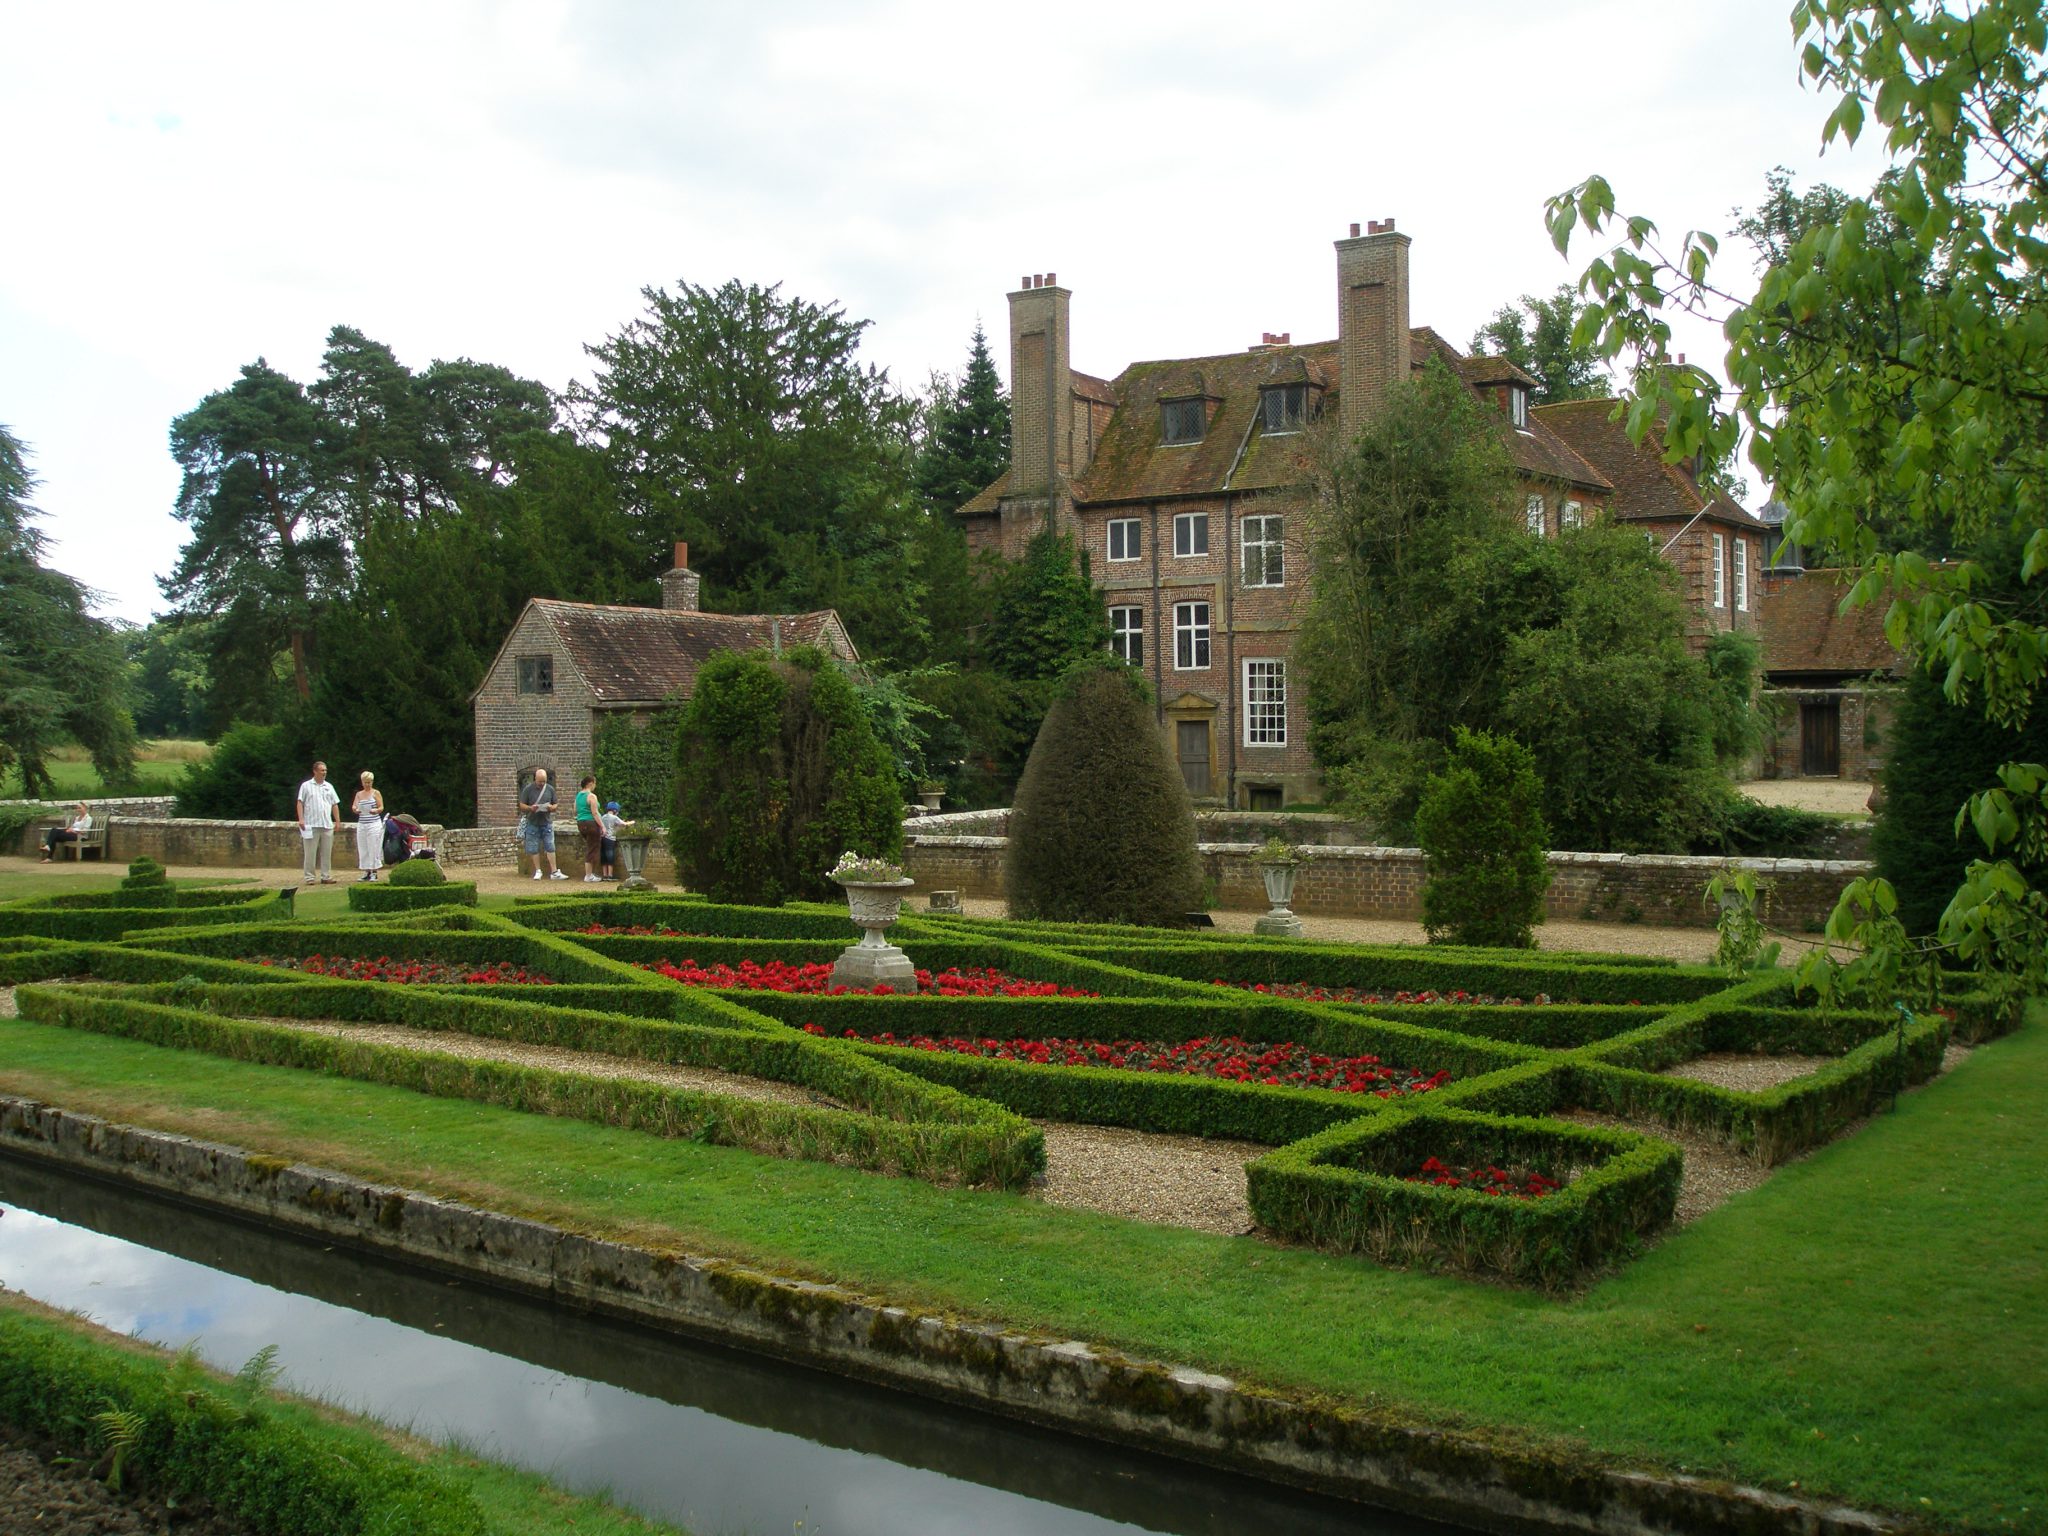 The Knot Garden, which is between the inner and outer moats. The House is encircled by the much wider inner moat.